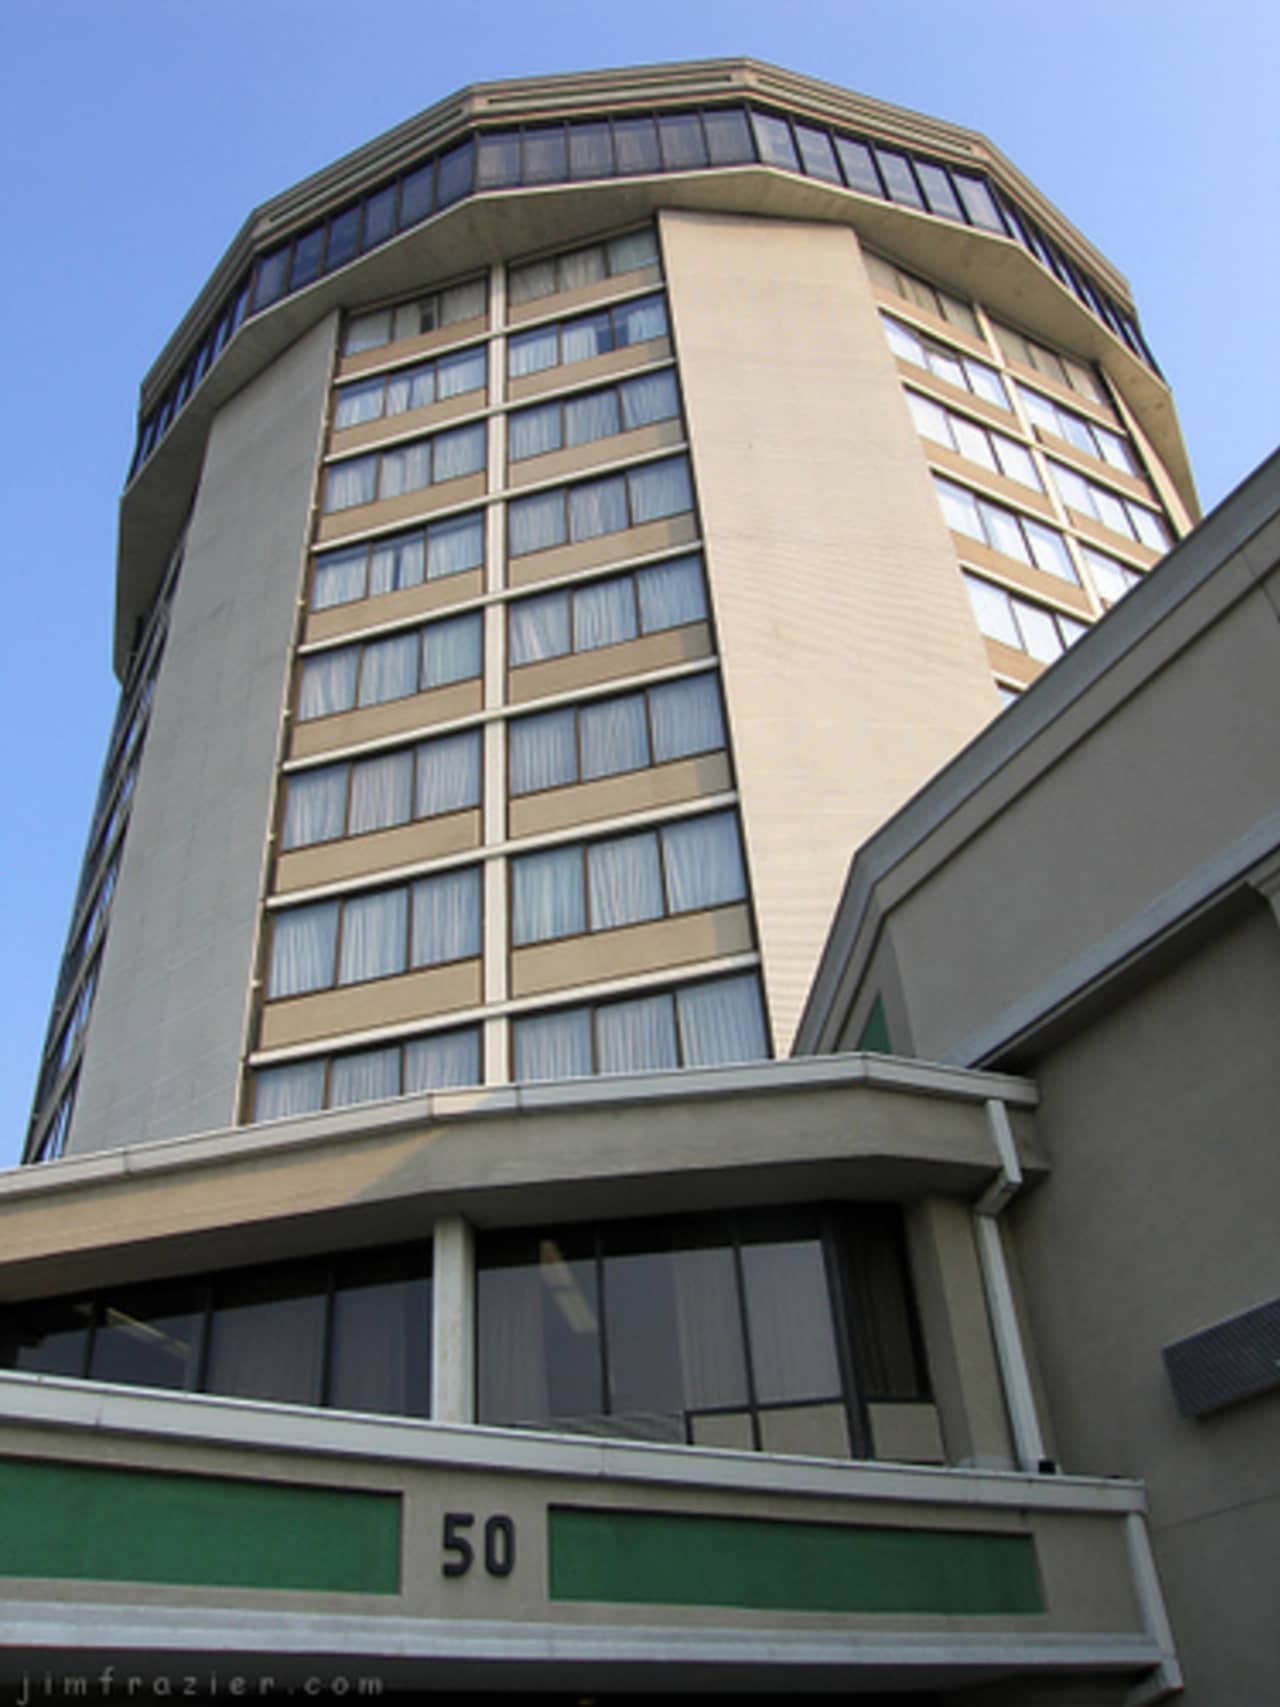 After six years, the former Holiday Inn has reopened – but as a Crowne Plaza